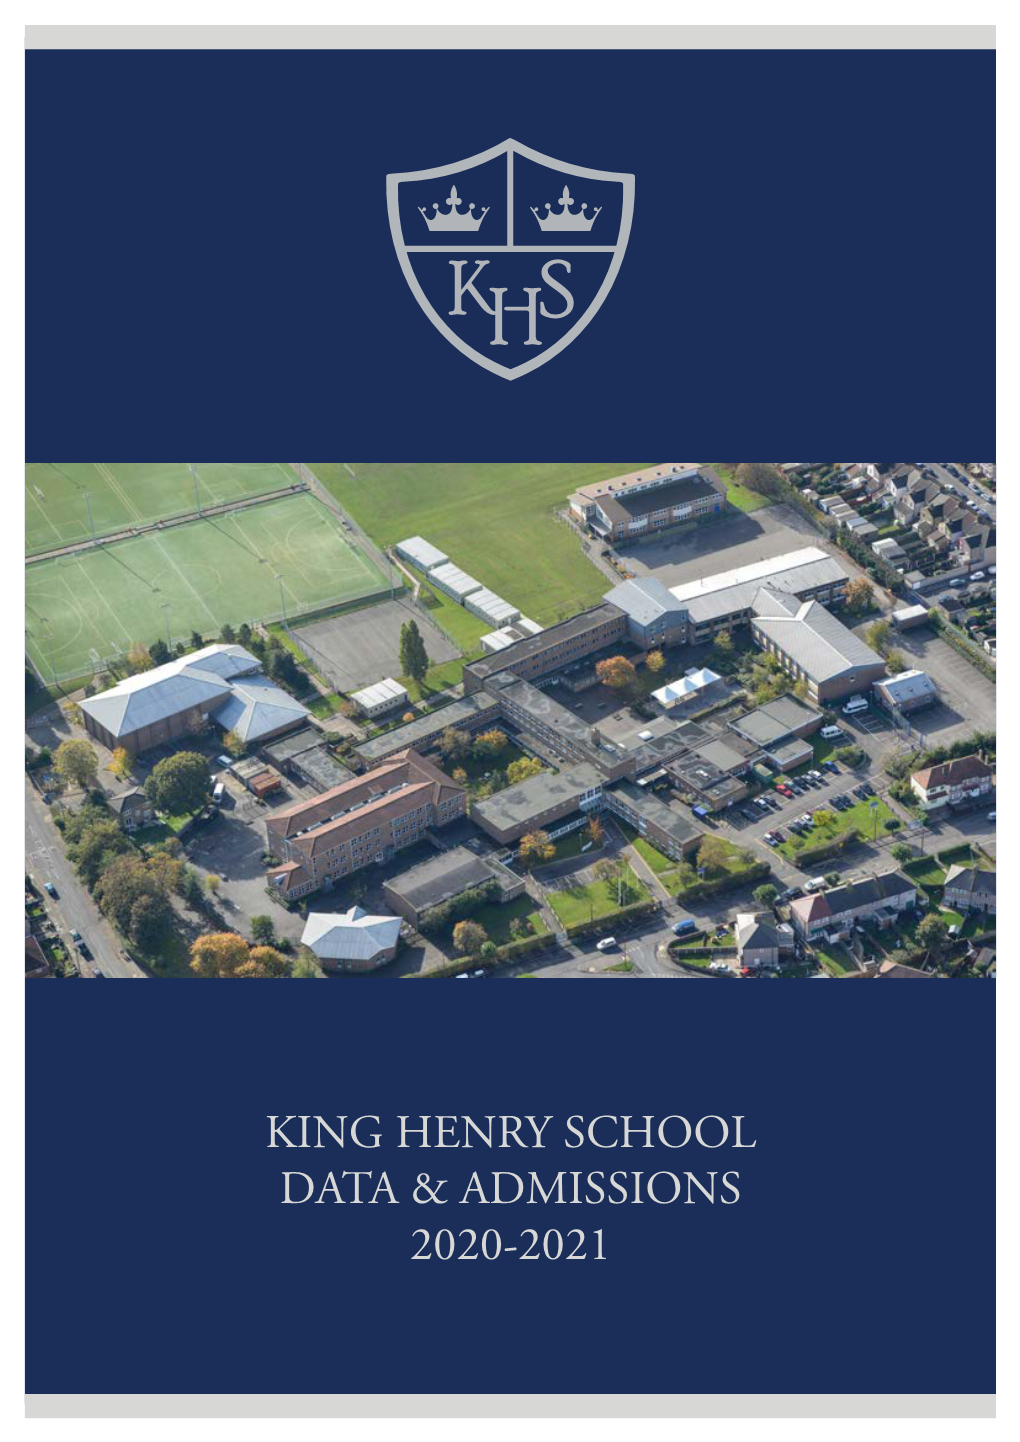 King Henry School Data & Admissions 2020-2021